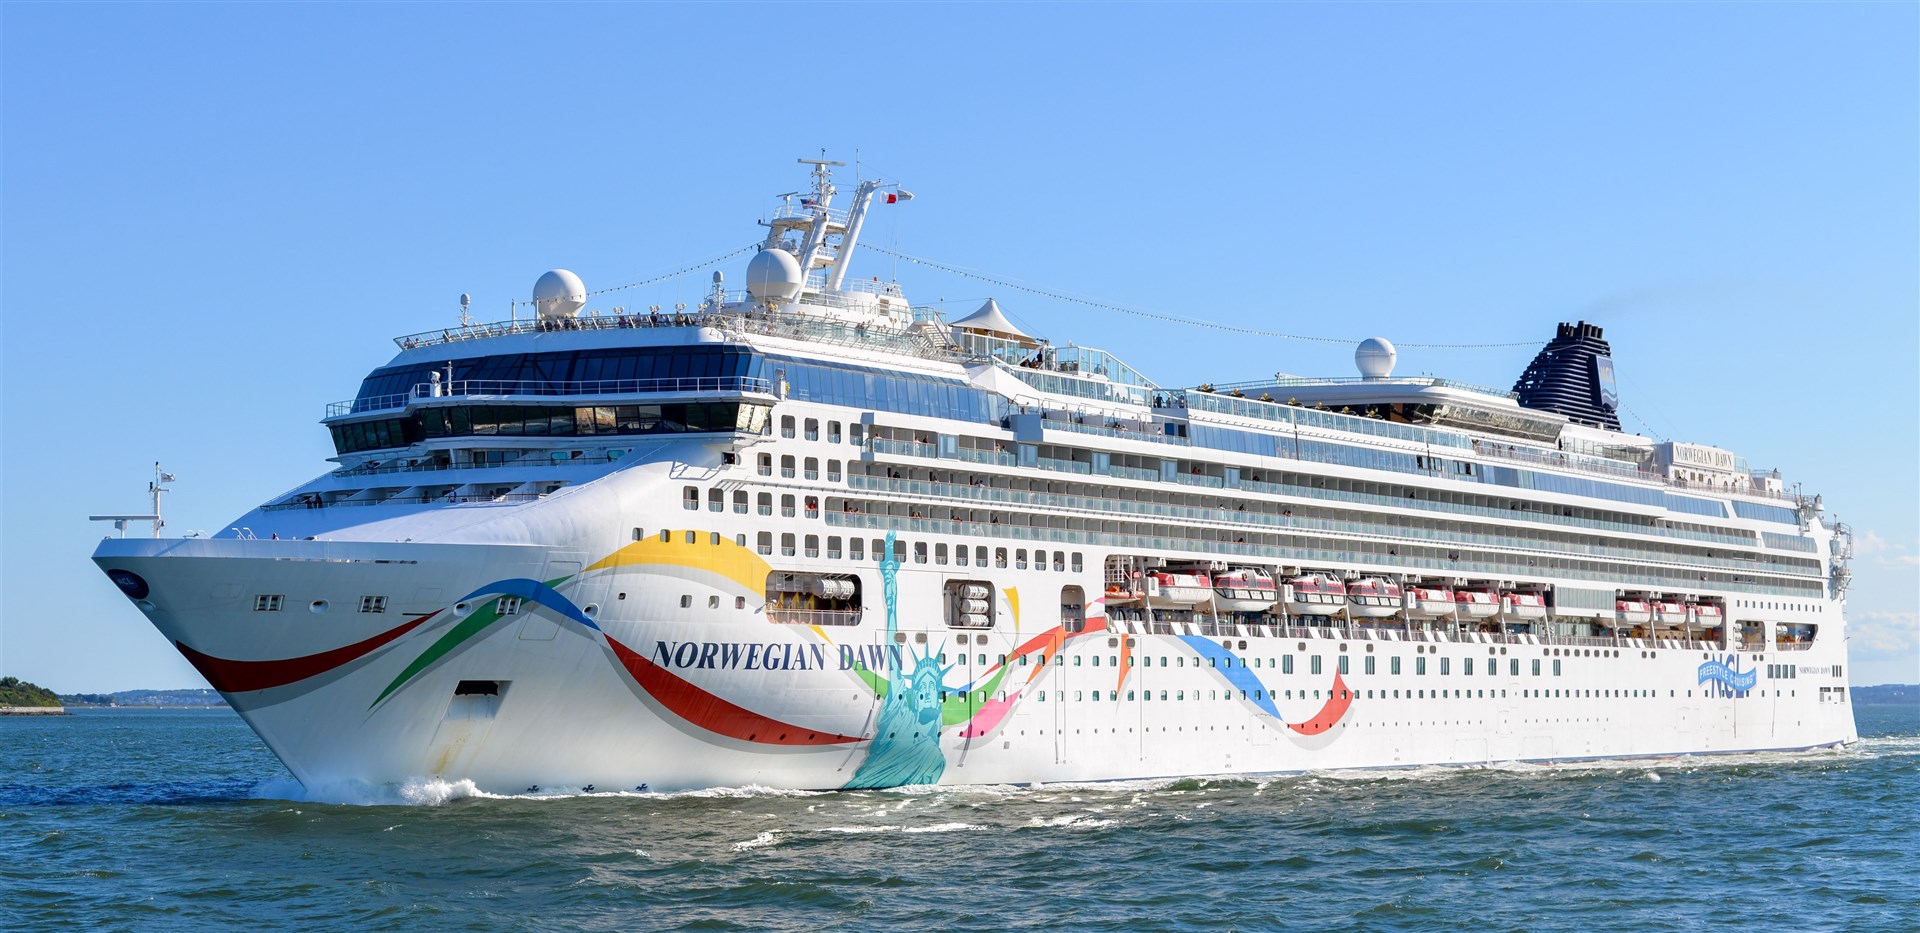 The Norweigan Dawn cruise ship in 2014. Picture: Fletcher6, CC BY 4.0 <https://creativecommons.org/licenses/by/4.0>, via Wikimedia Commons